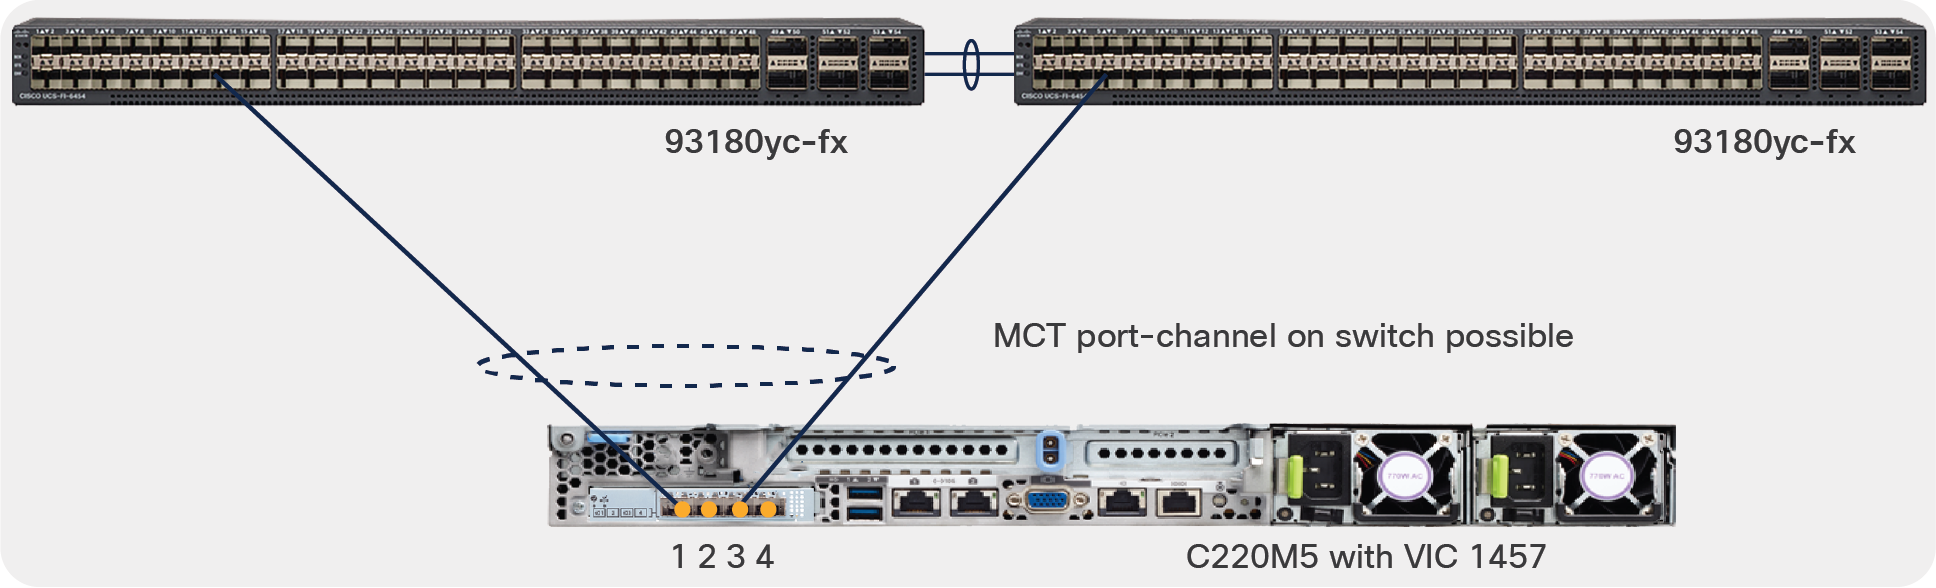 Standalone mode server connectivity with HW port-channels on VIC and MCT port-channel possible with single-links to each ToR